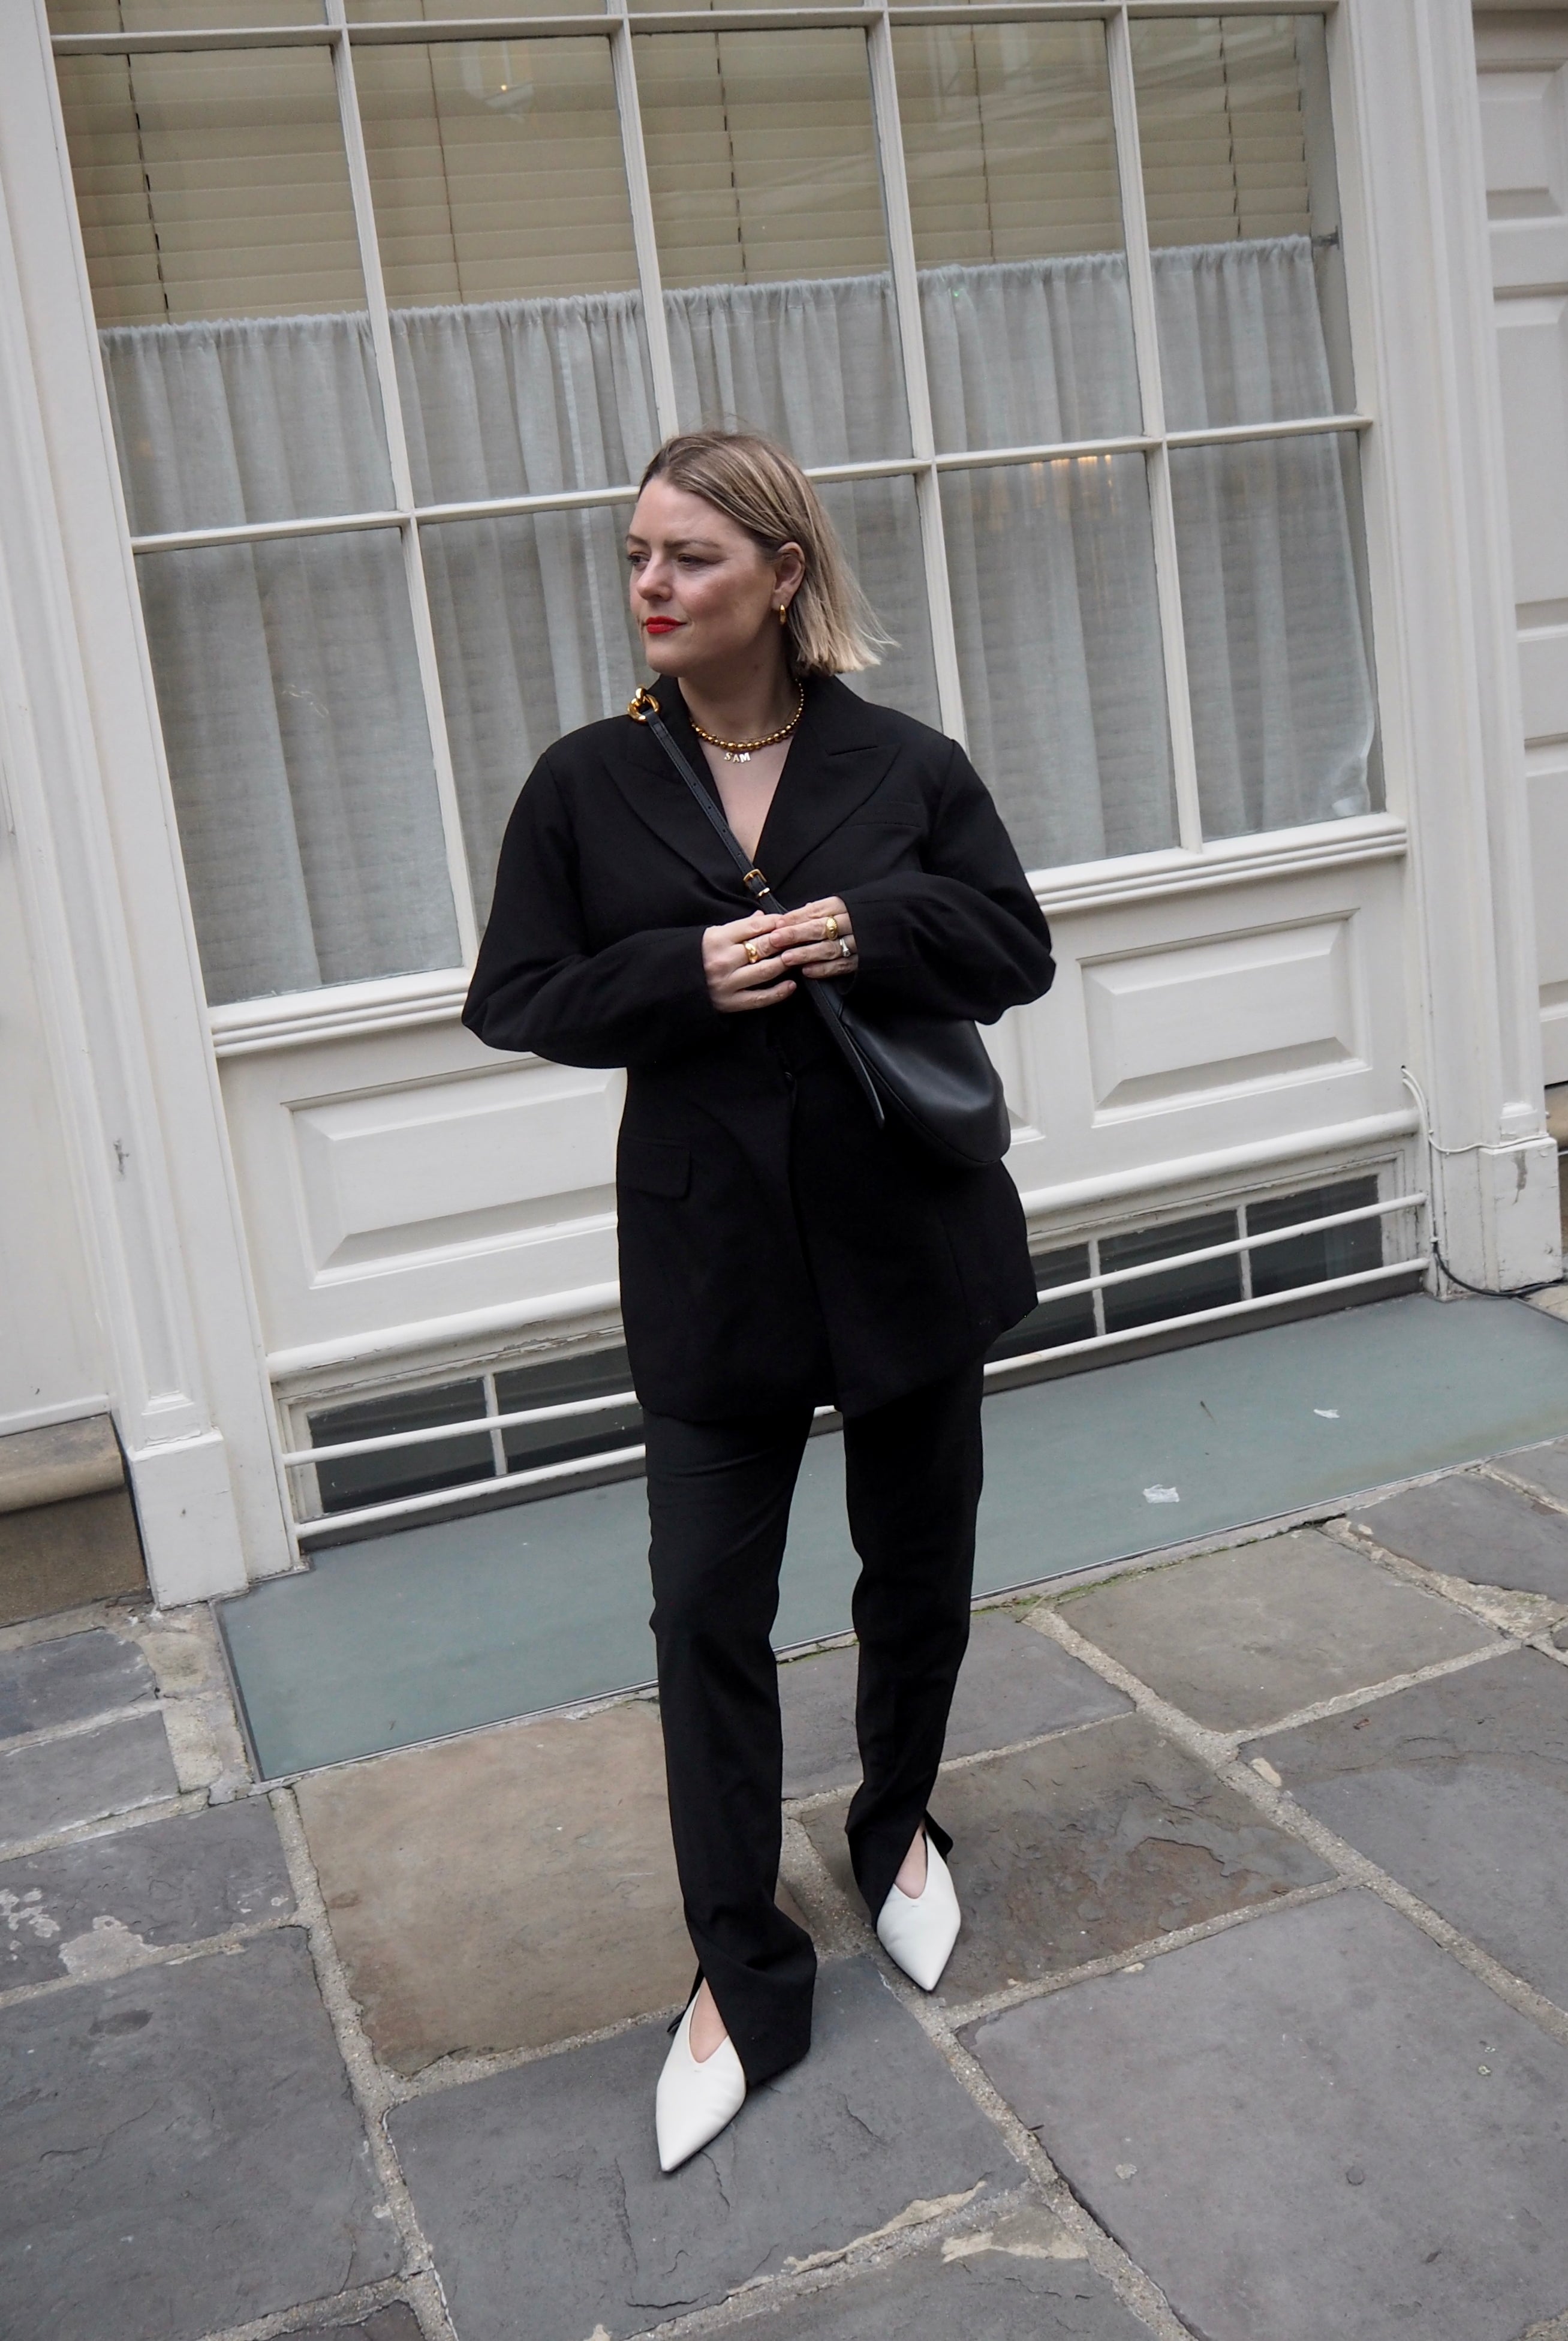 Stylist Sam Preston Shares Her Tips For Curating A Minimalist Wardrobe And Navigating Easeful Daily Wear